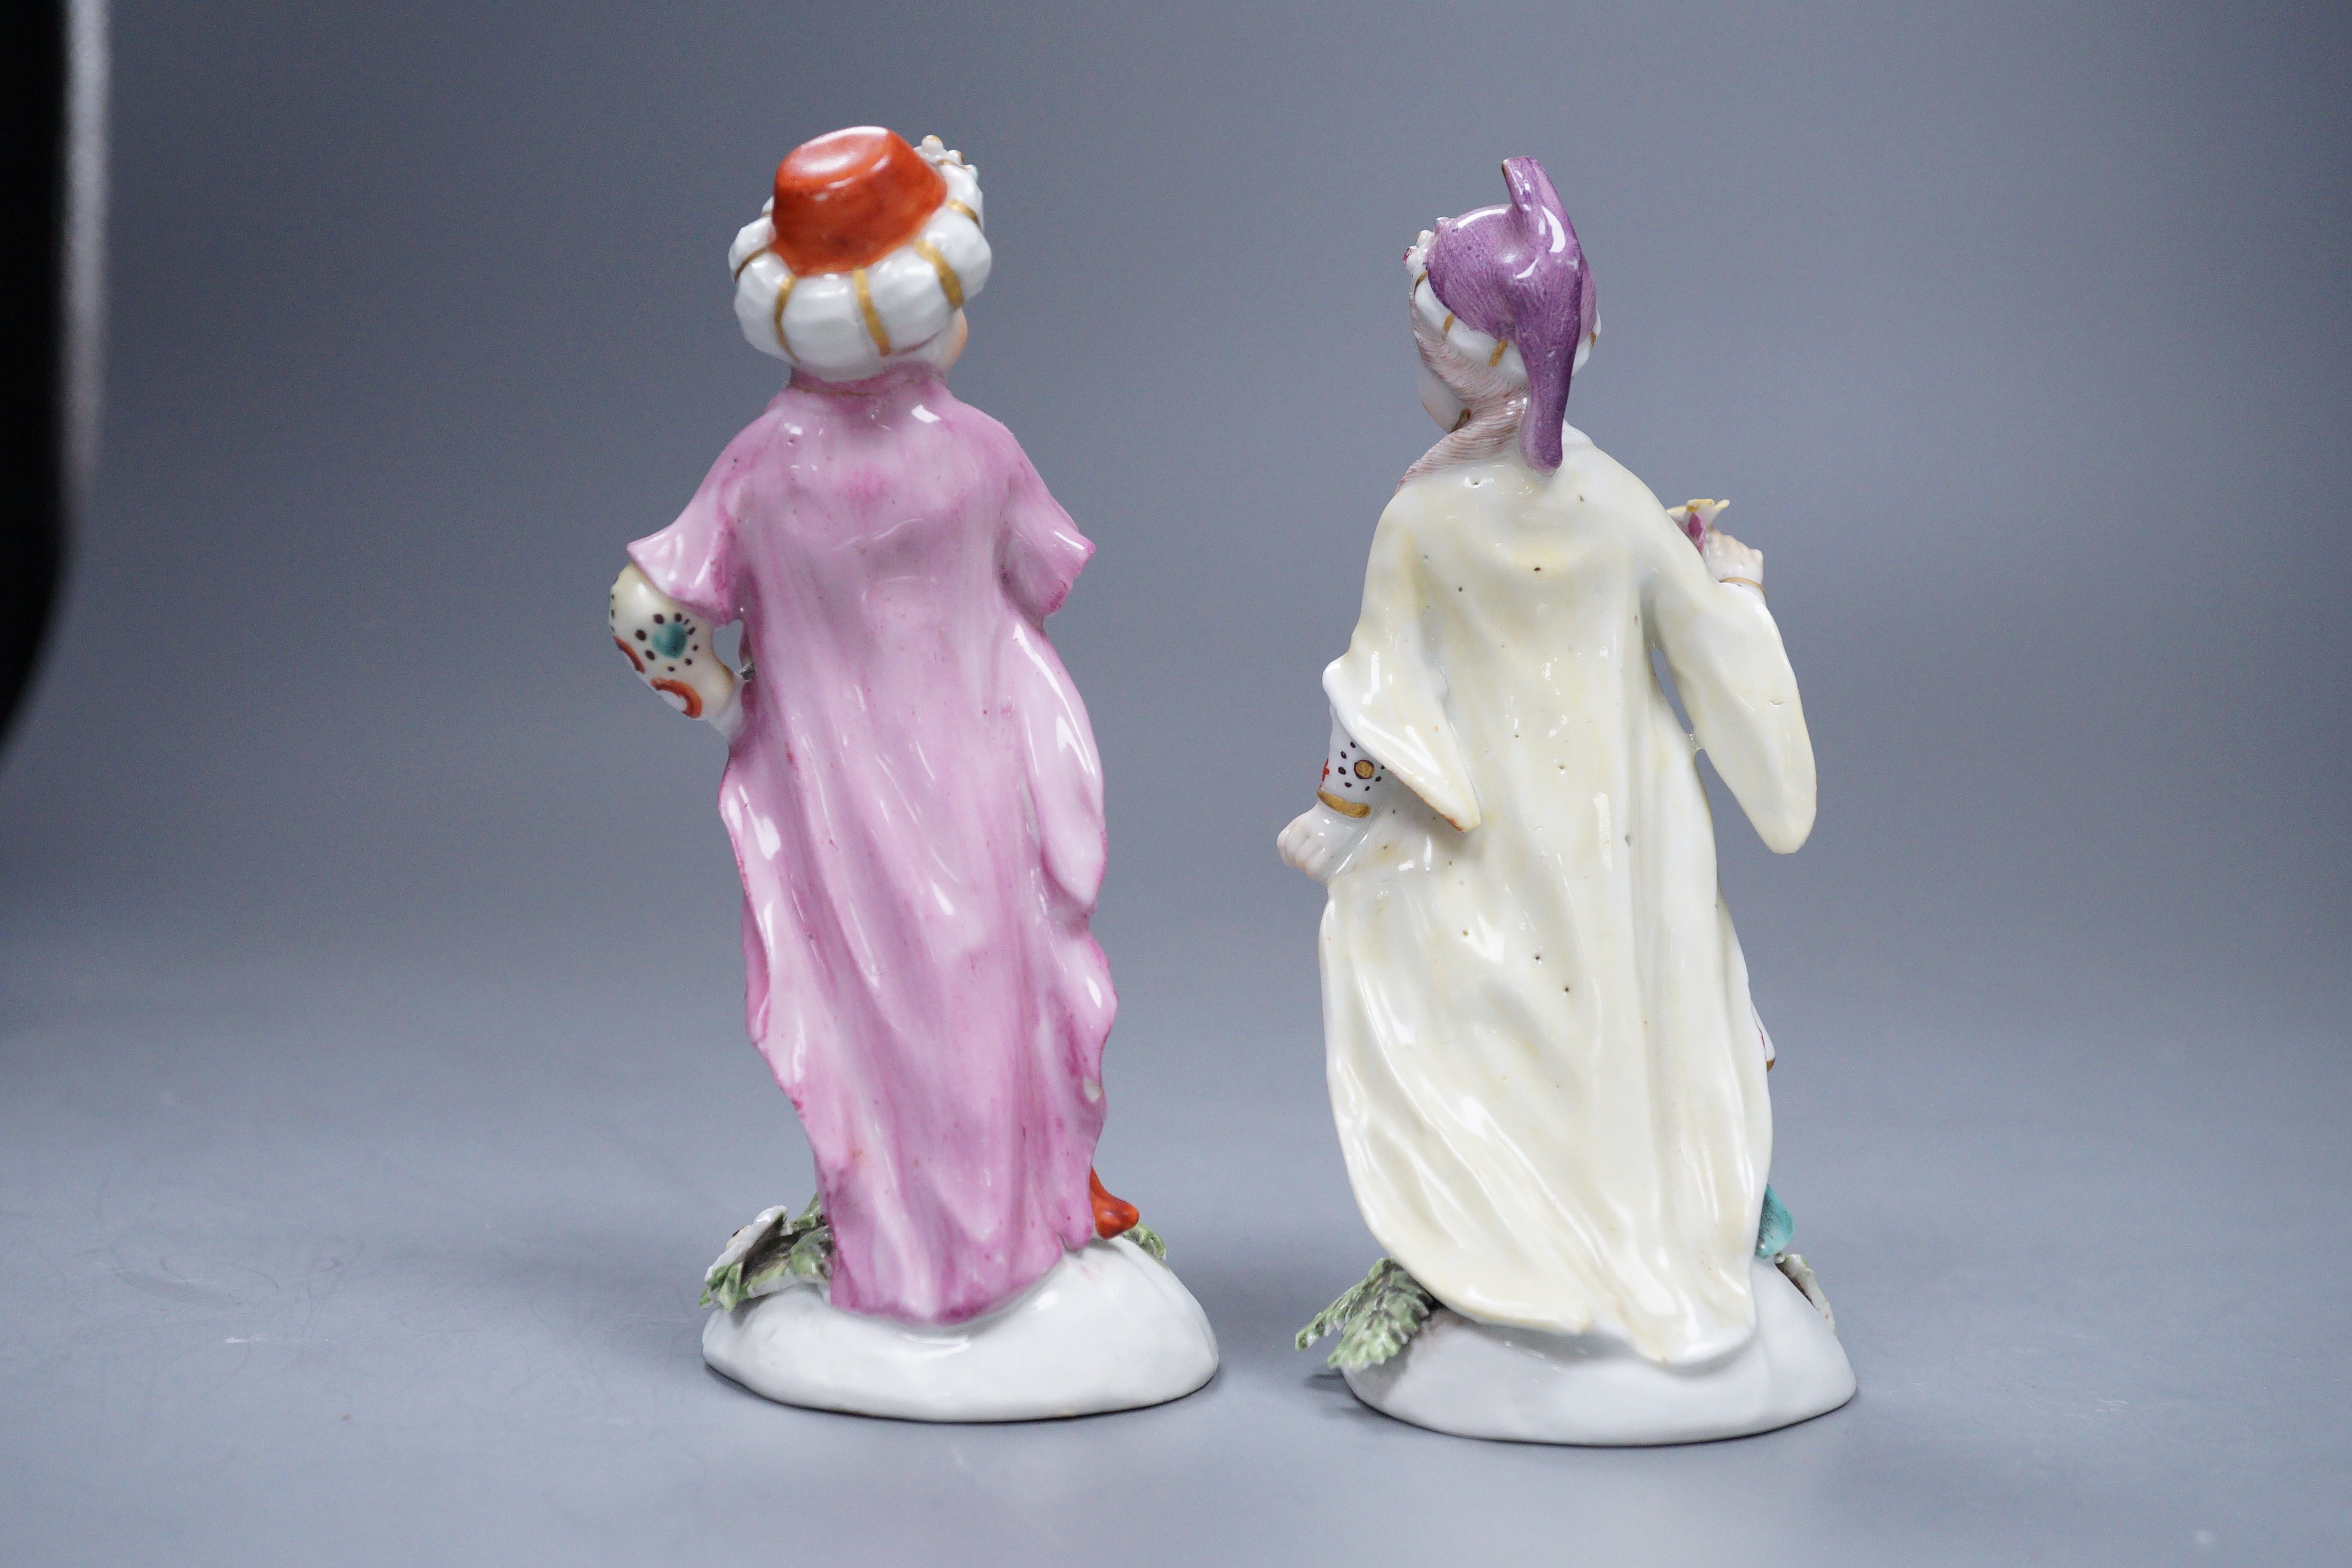 A good pair of Derby figures of a Turk and Companion, c.1765-70, 11.5cm